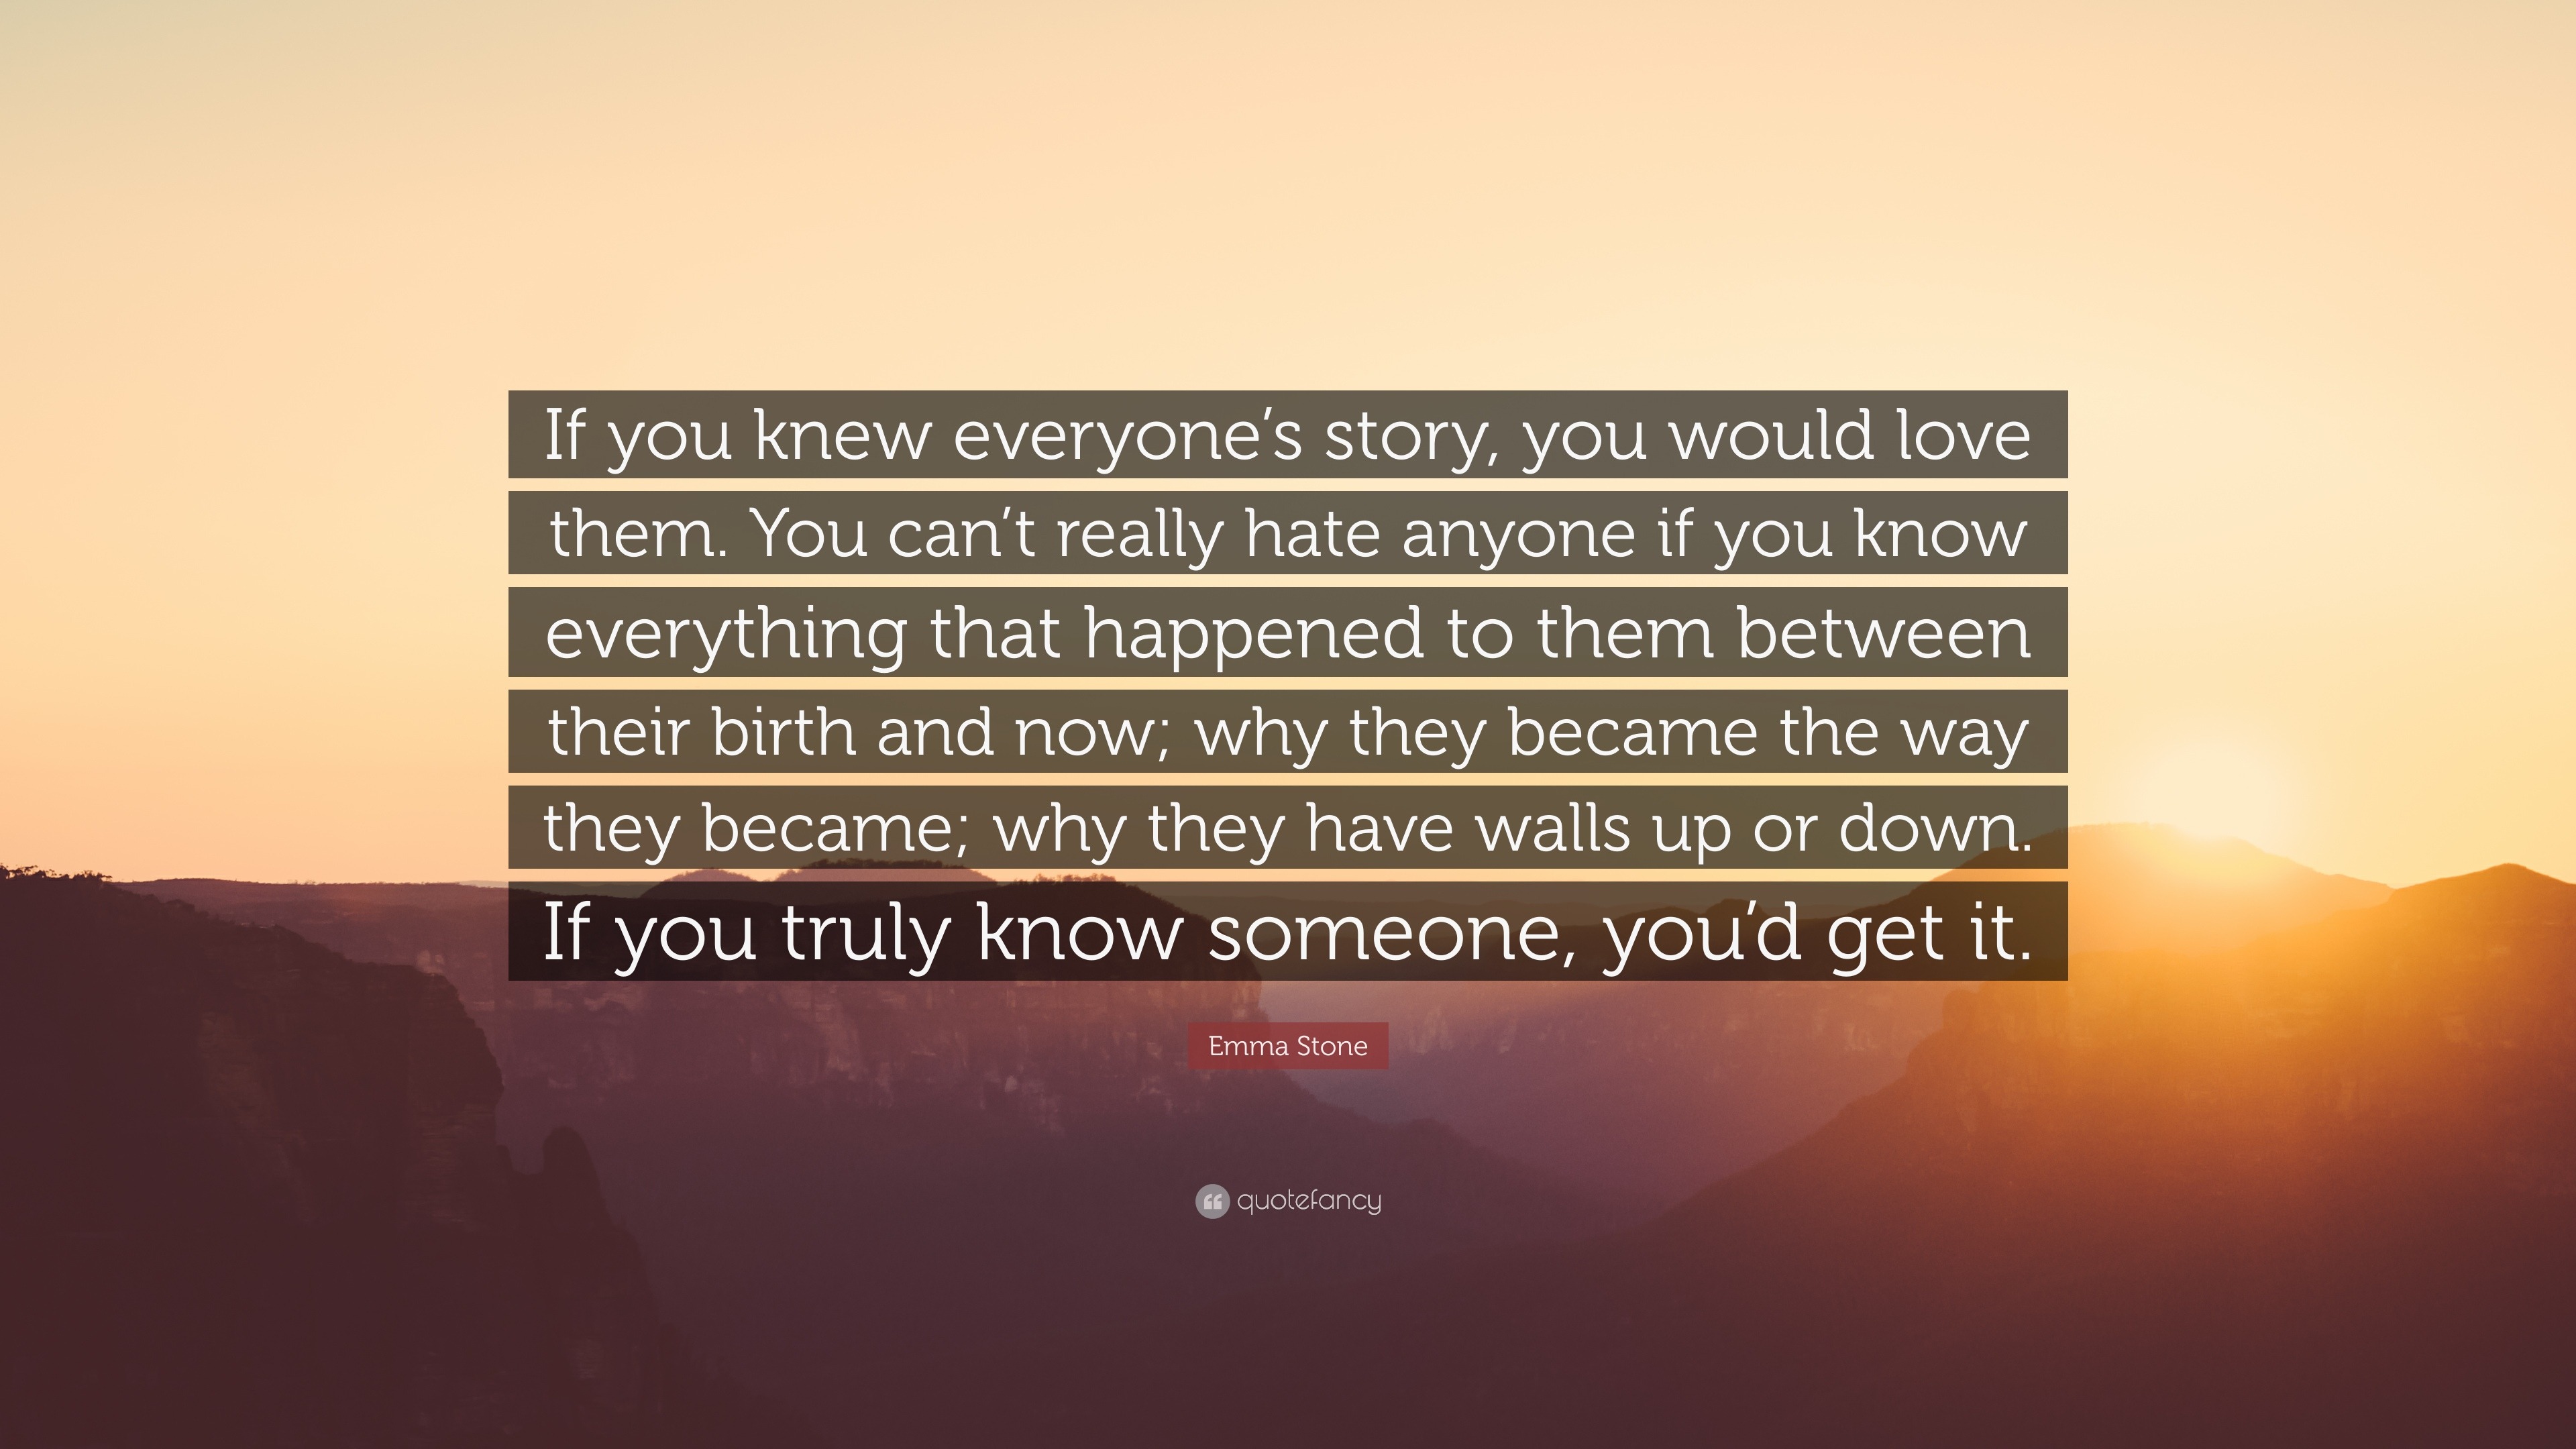 Emma Stone Quote “If you knew everyone s story you would love them